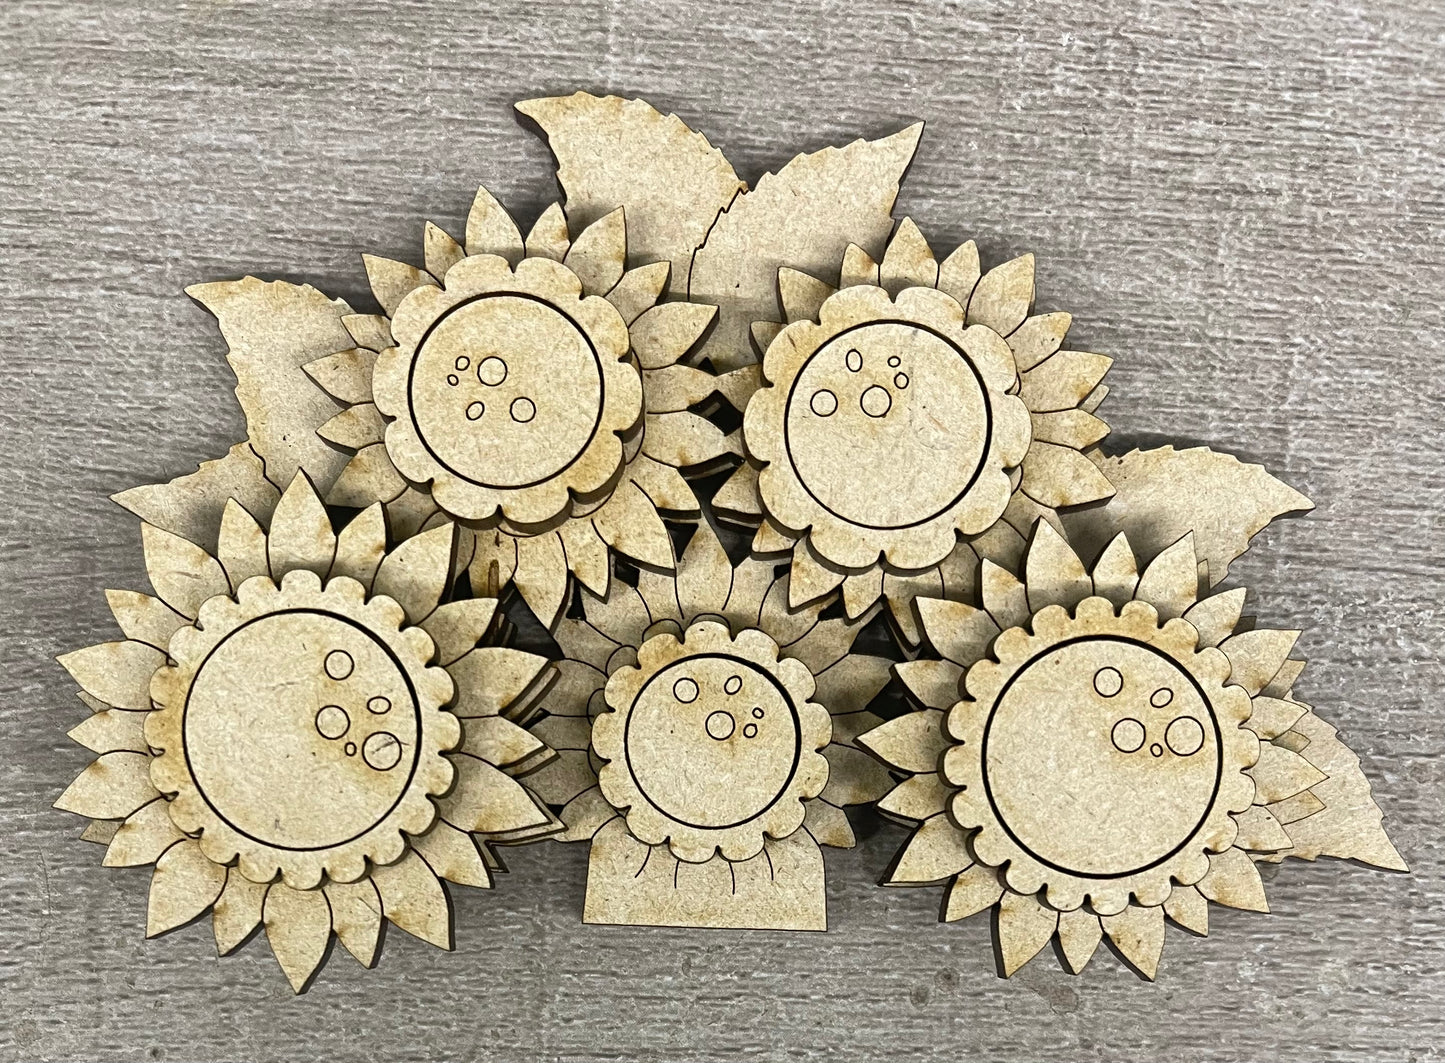 Sunflower Insert for basket - unpainted wooden cutouts, ready for you to paint